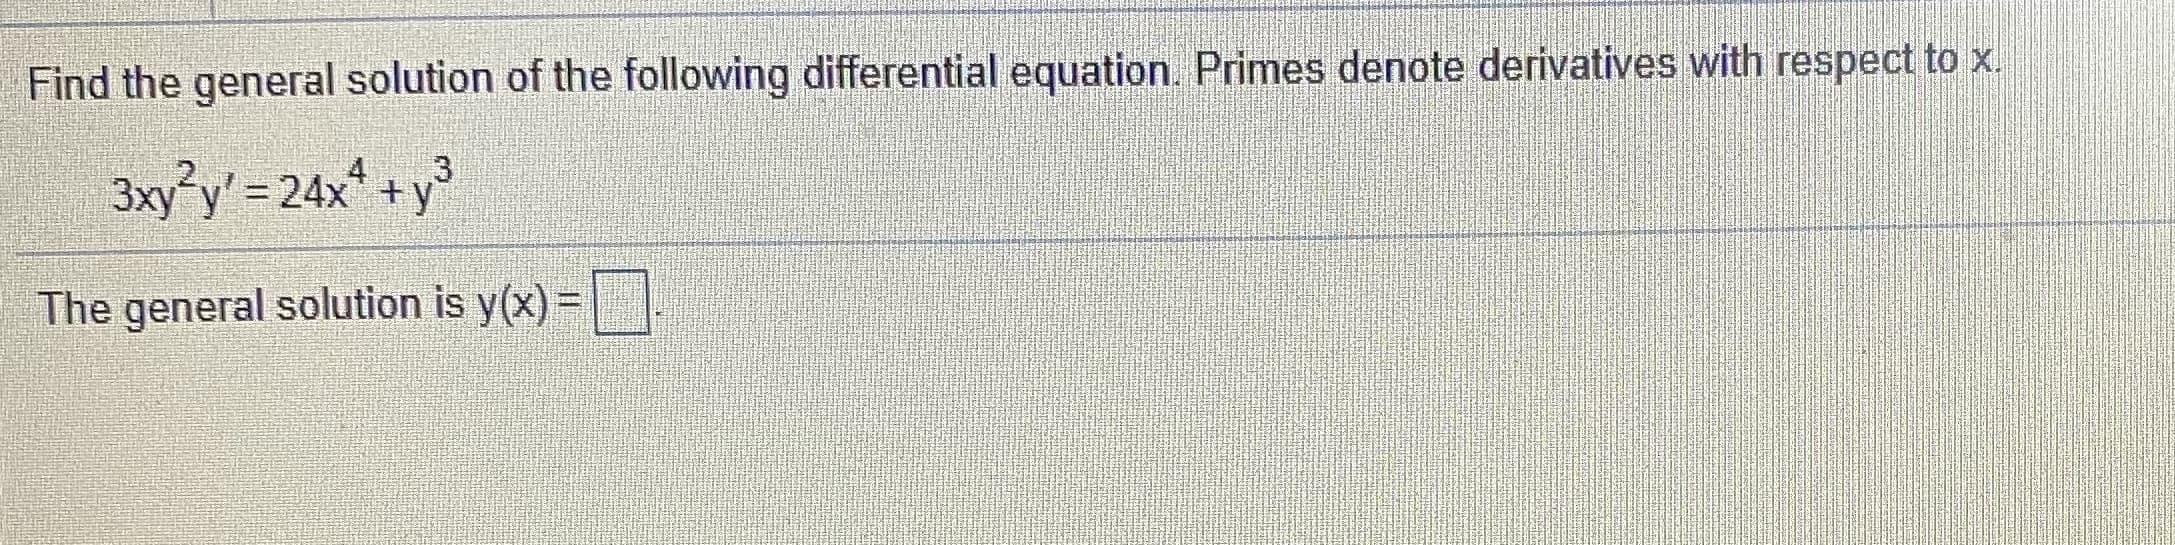 Find the general solution of the following differential equation. Primes denote derivatives with respect to x.
3xy°y' = 24x* +y
3
%3D
The general solution is y(x)=
